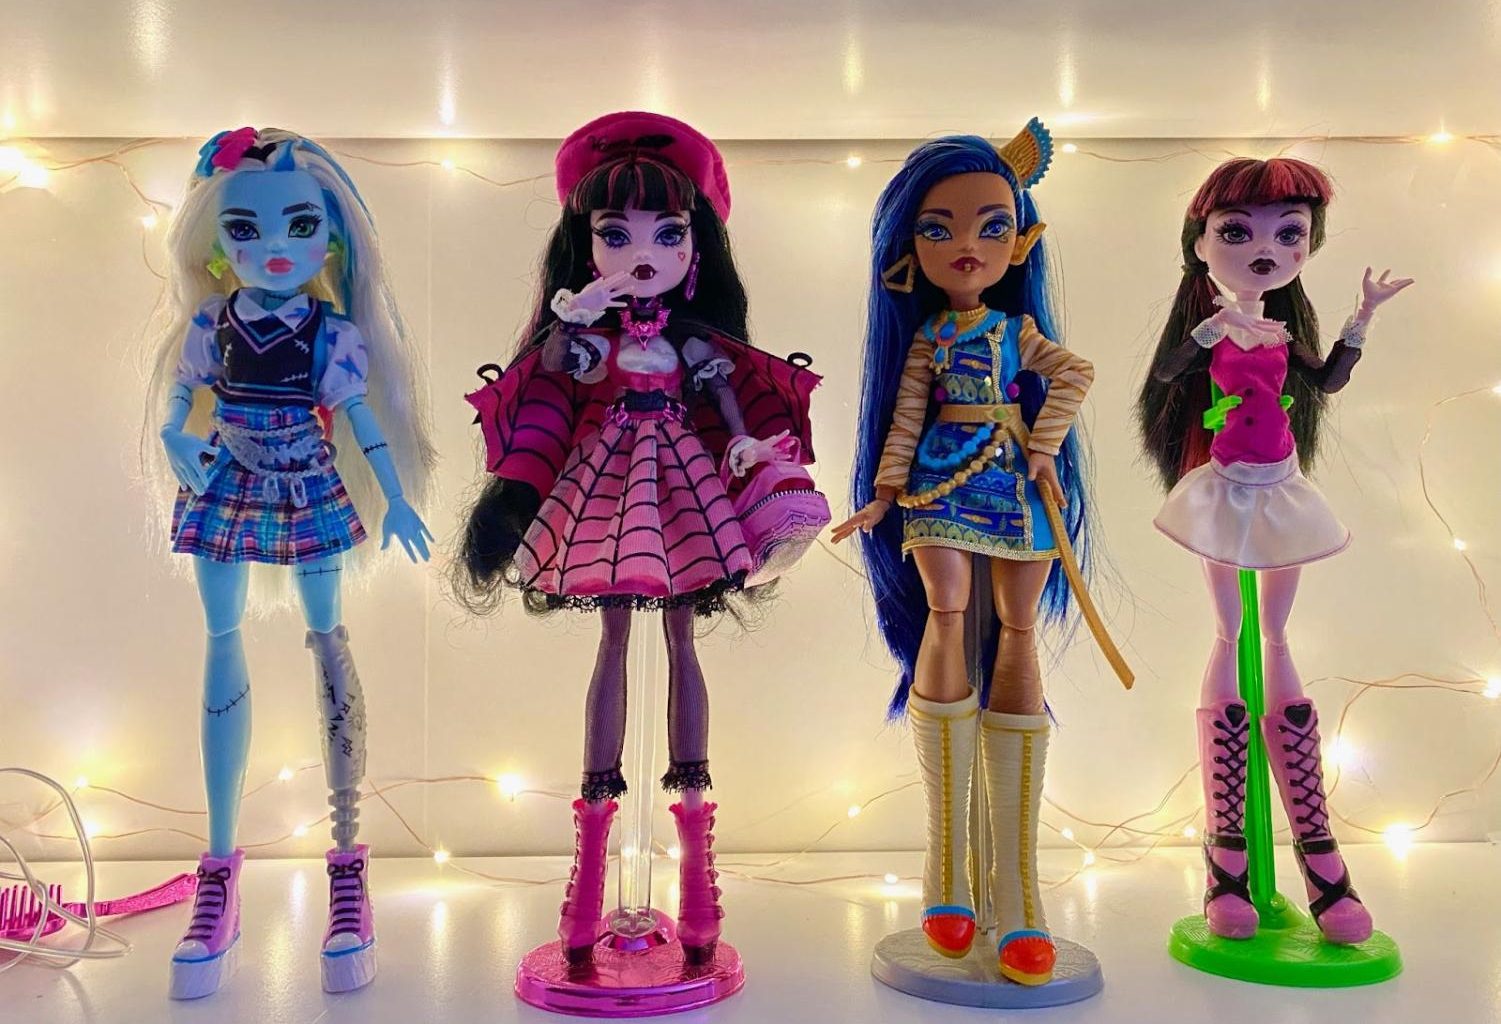 Monster High: Ghoulia Yelps  Monster high characters, Monster high, Monster  high dolls